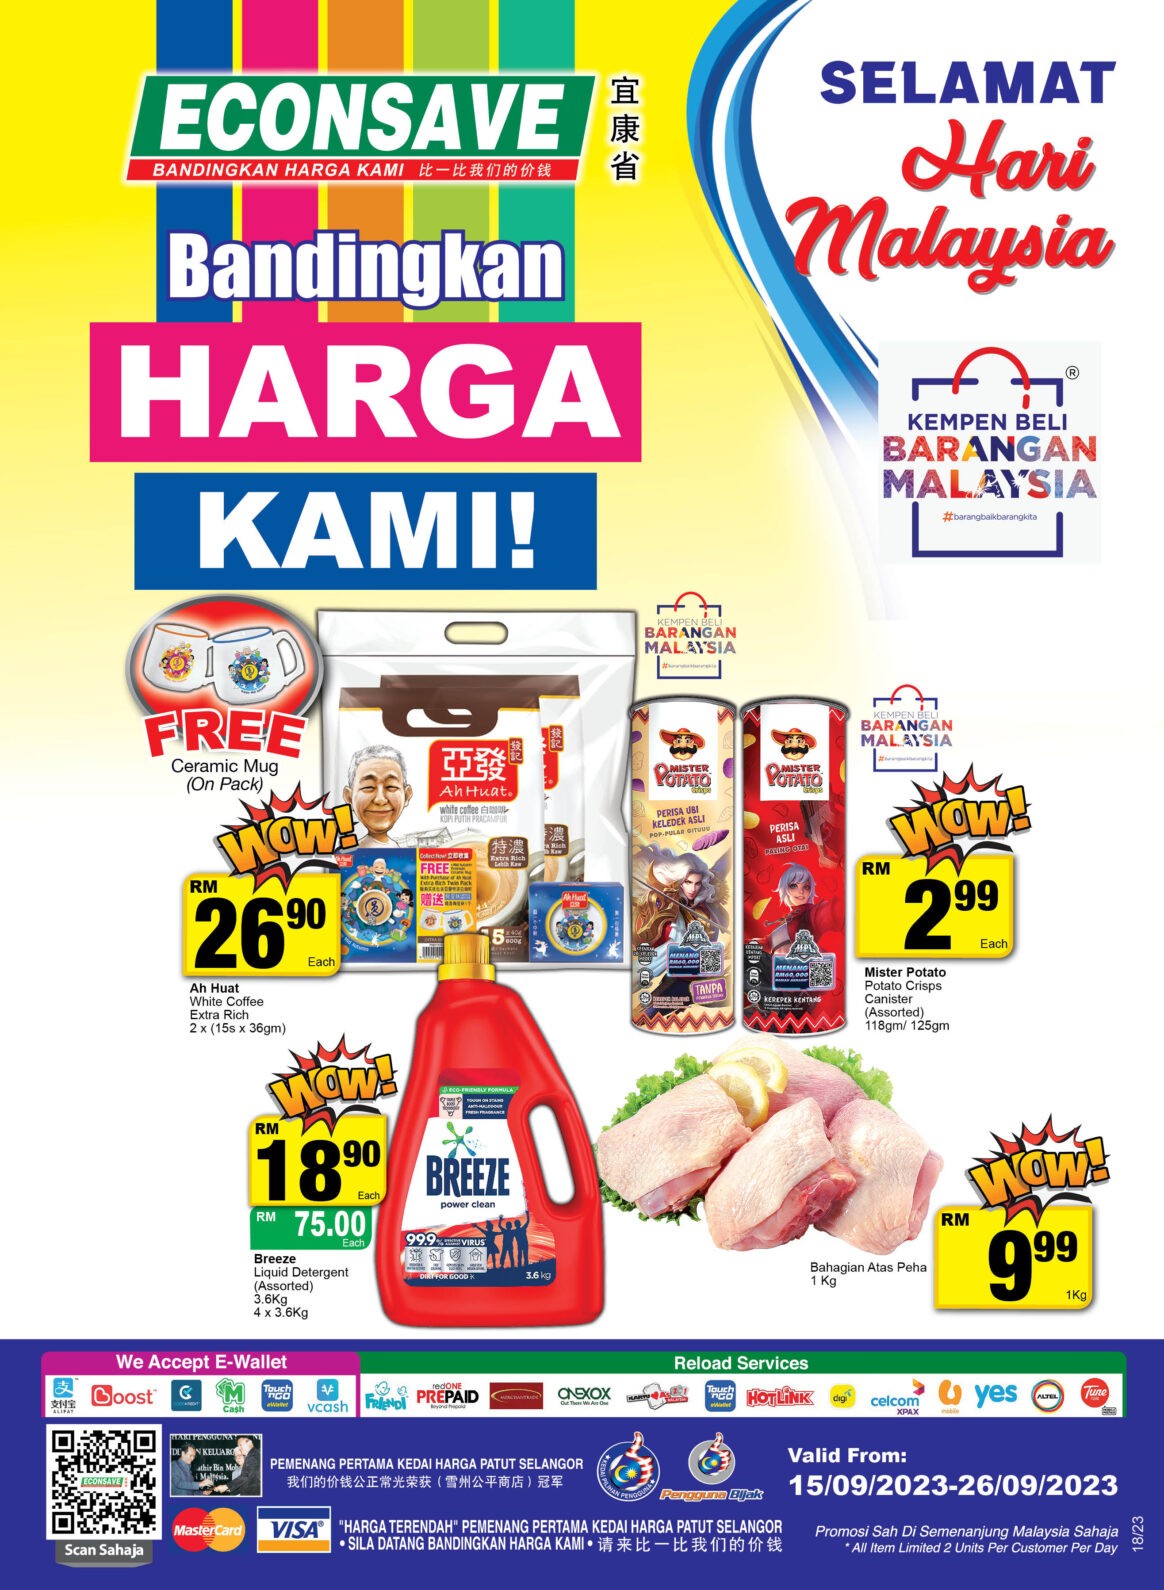 Econsave Malaysia Day 2023 Promotions - Econsave